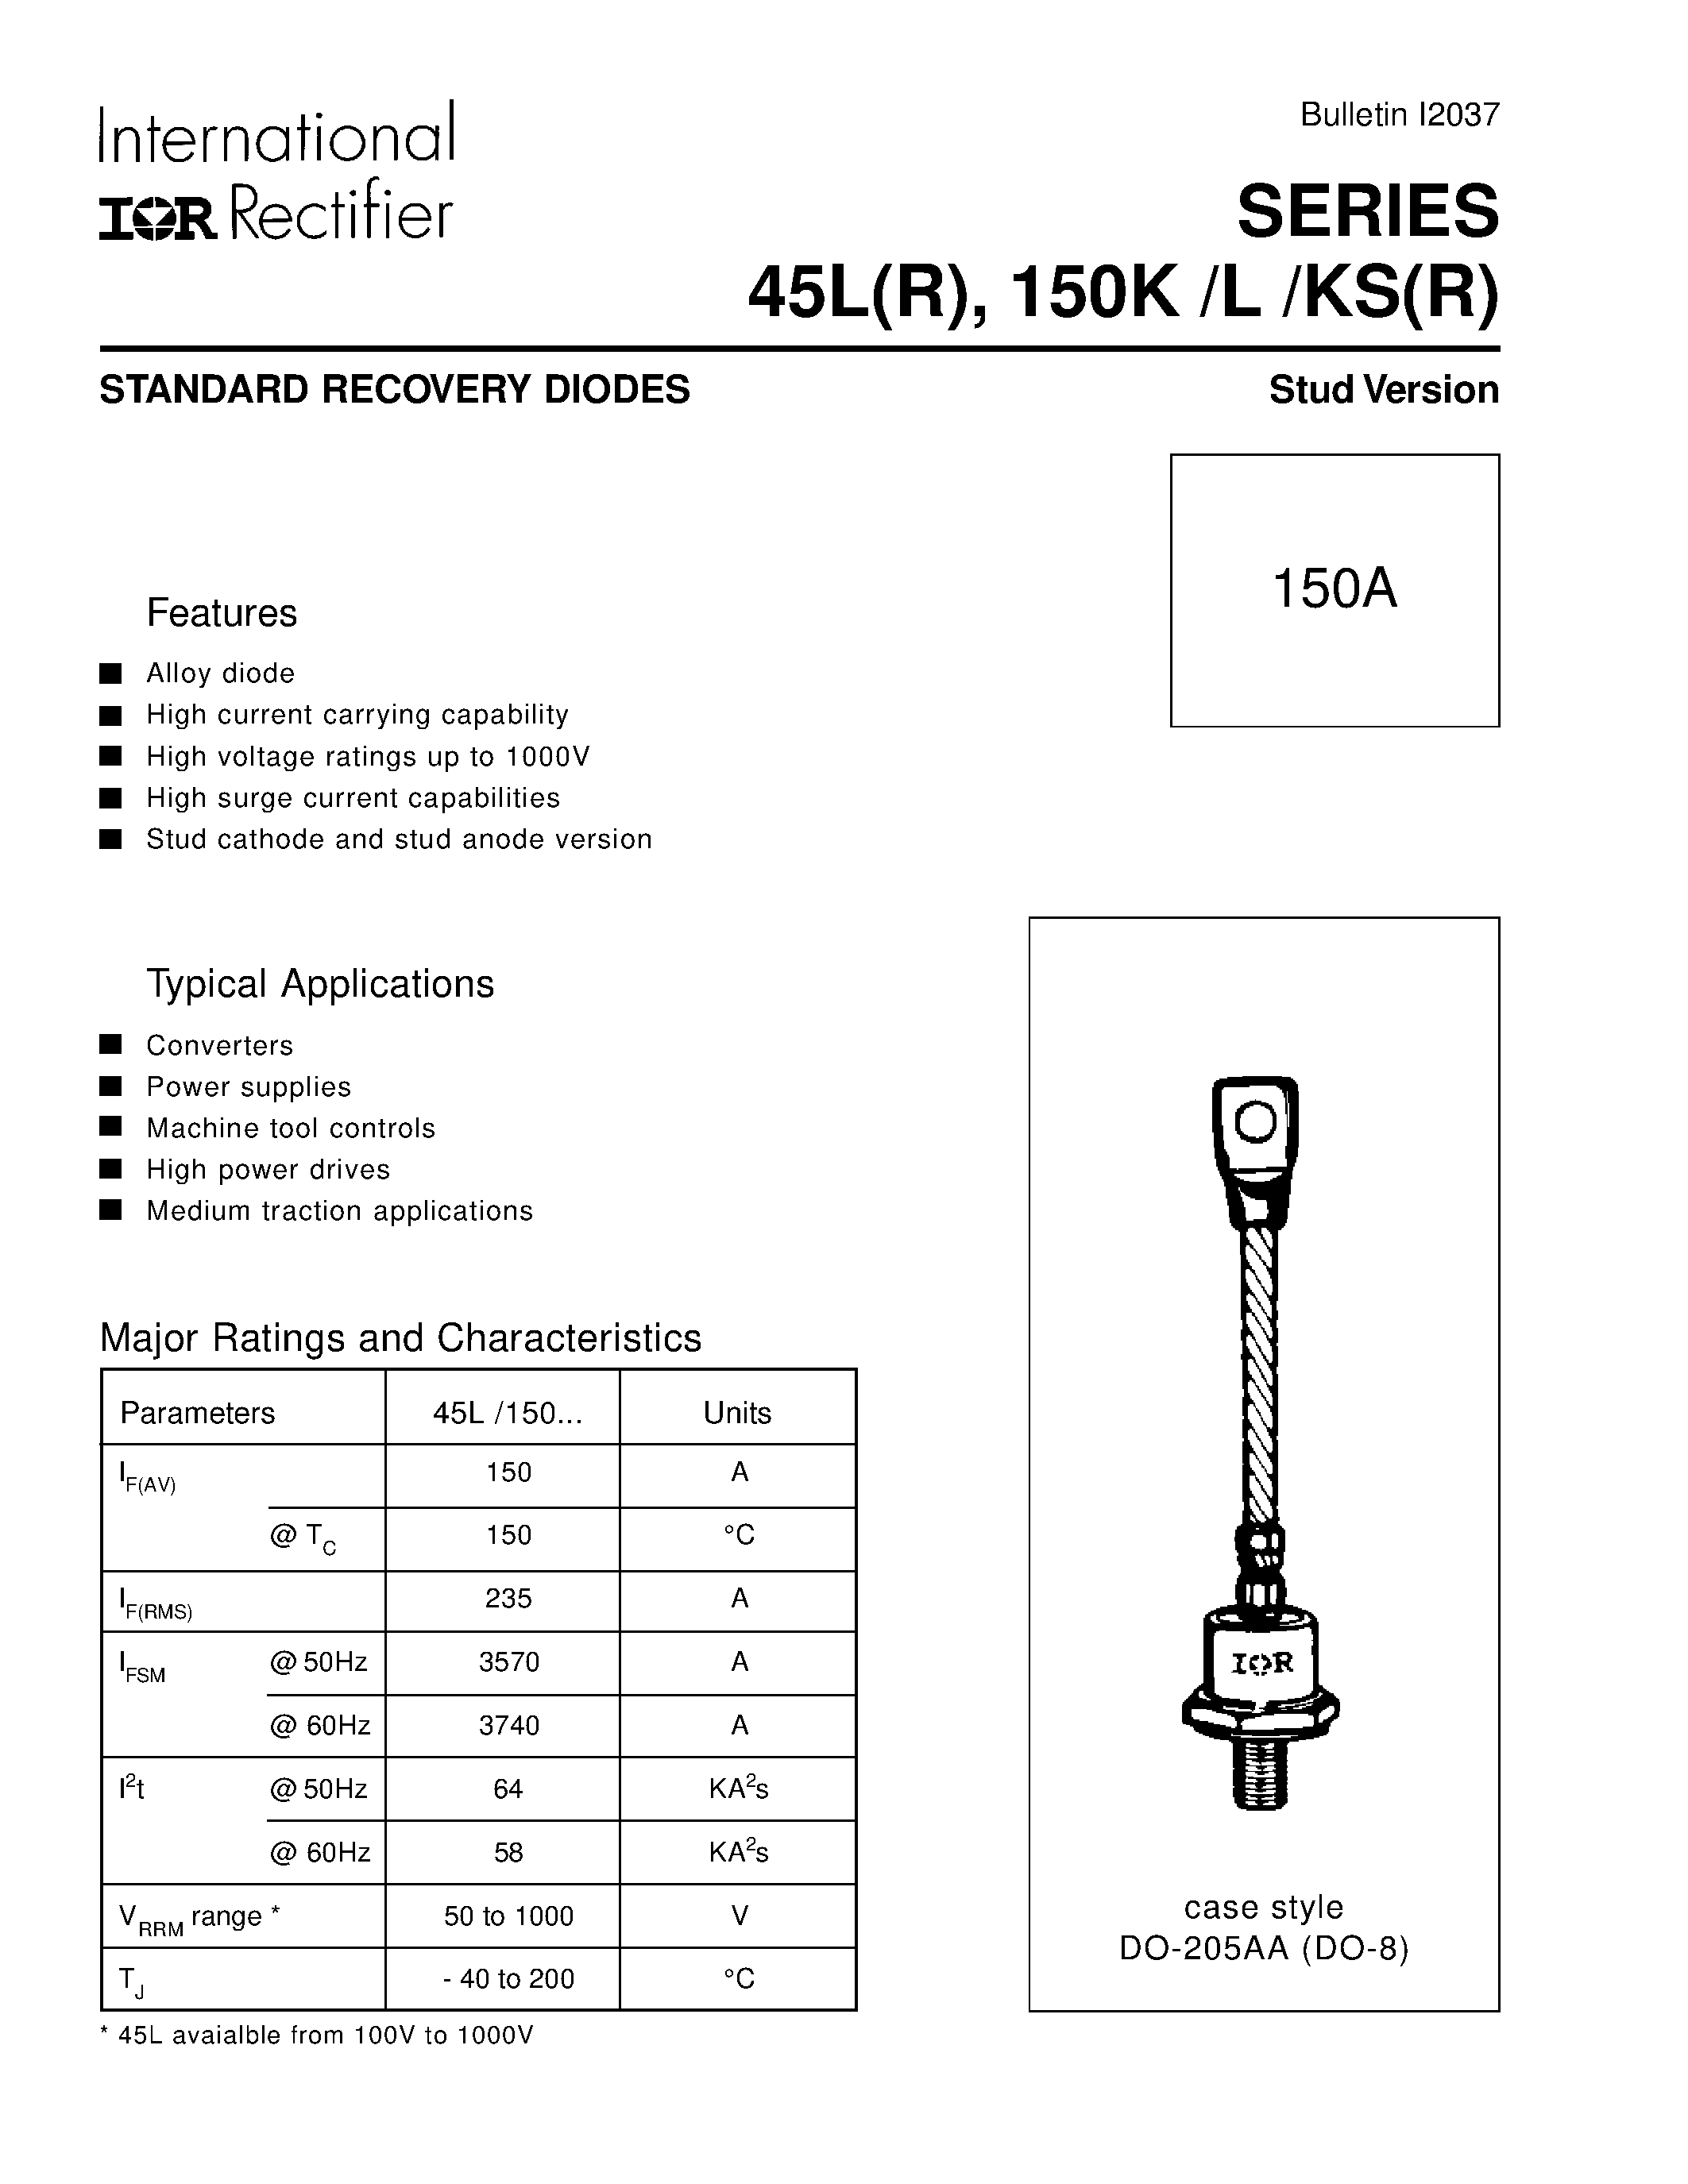 Datasheet 45L(R) - STANDARD RECOVERY DIODES Stud Version page 1